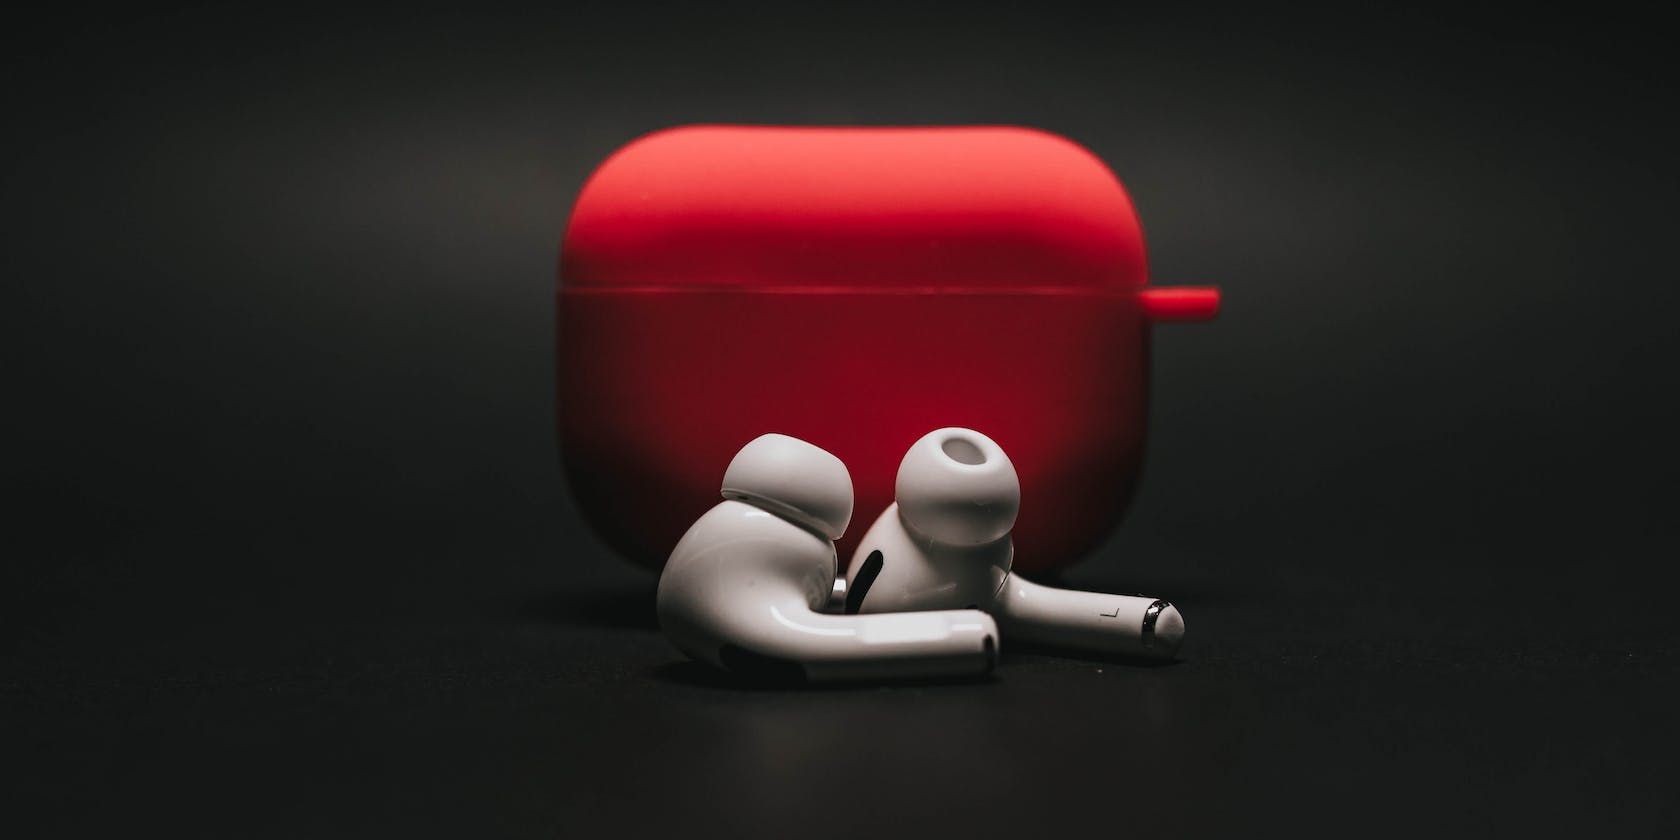 White earbuds with a red case against a black backdrop